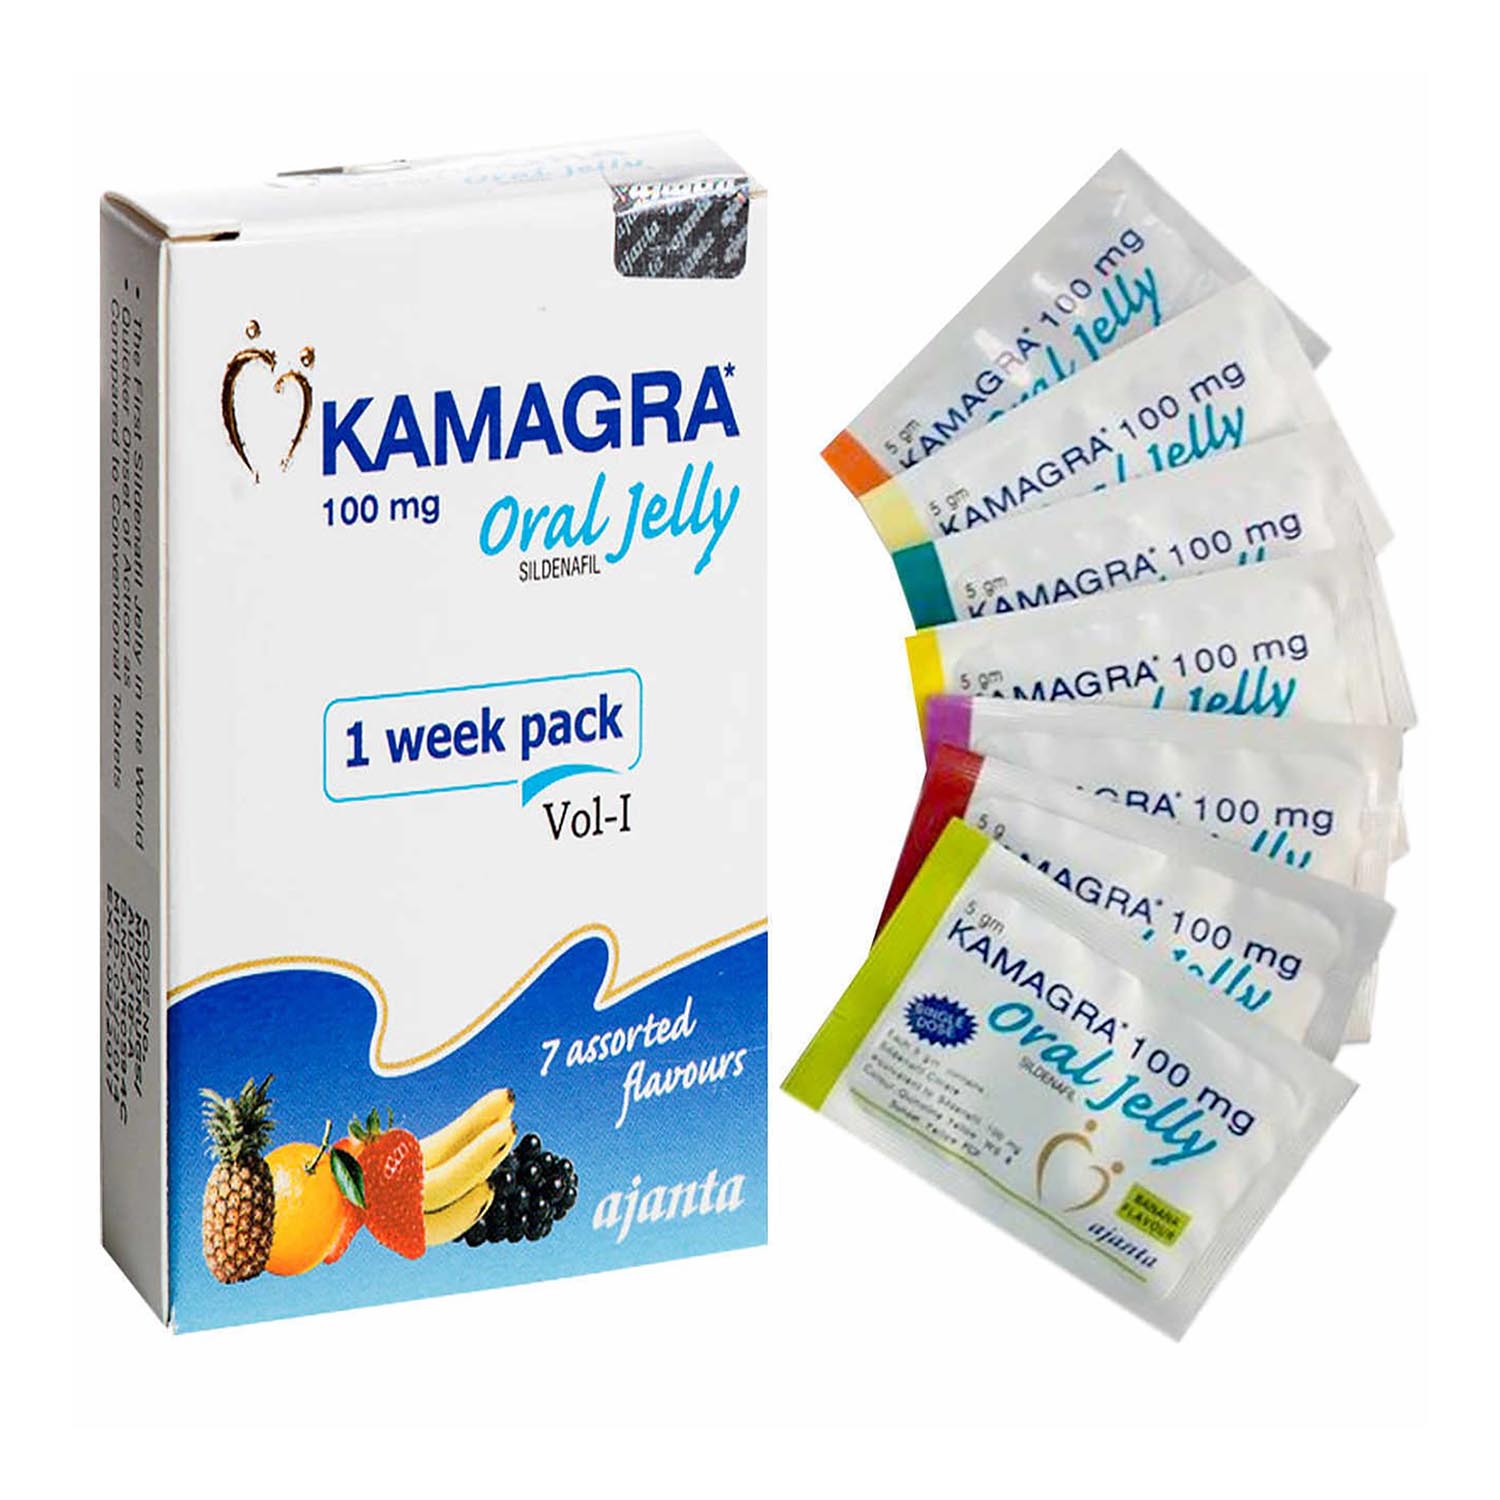 Kamagra Oral Jelly Manufacturer,Kamagra Oral Jelly Supplier and